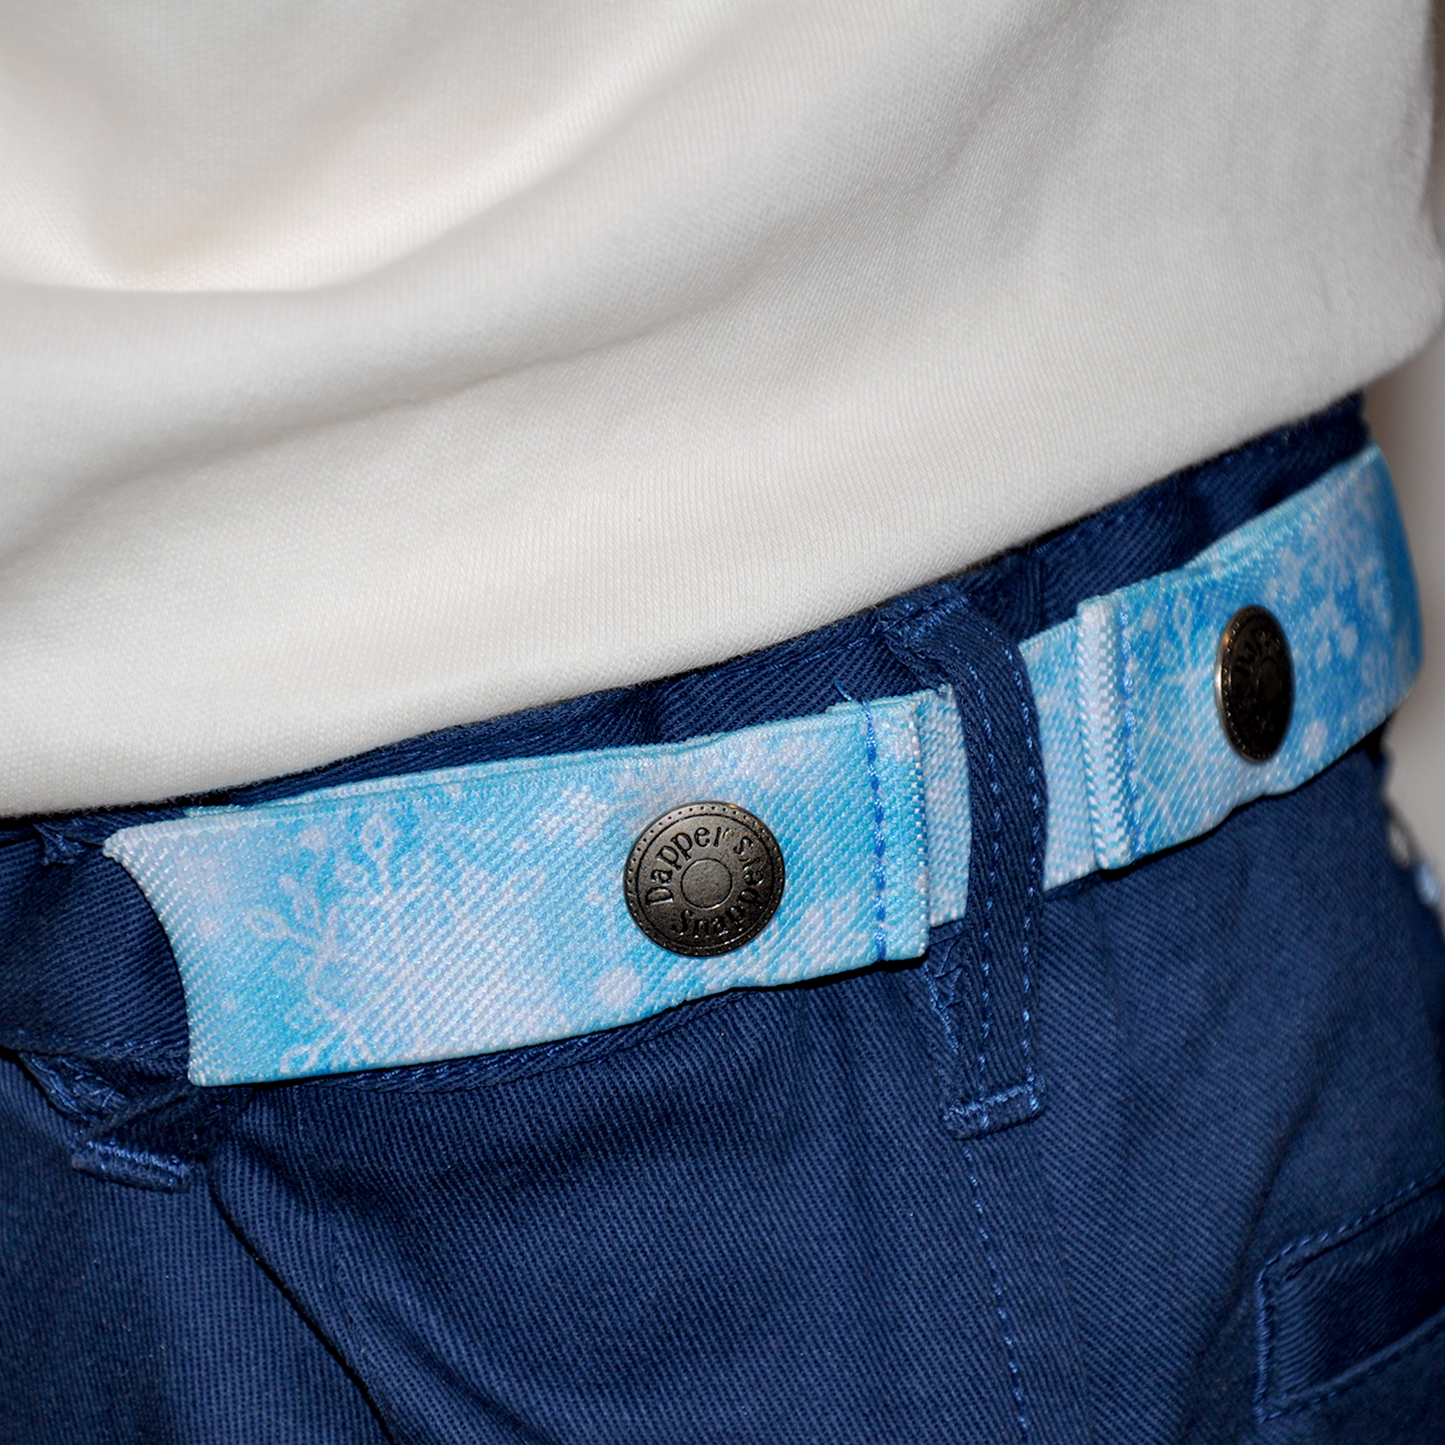 Dapper Snappers Made In the USA Baby & Toddler Adjustable Belt Patterns